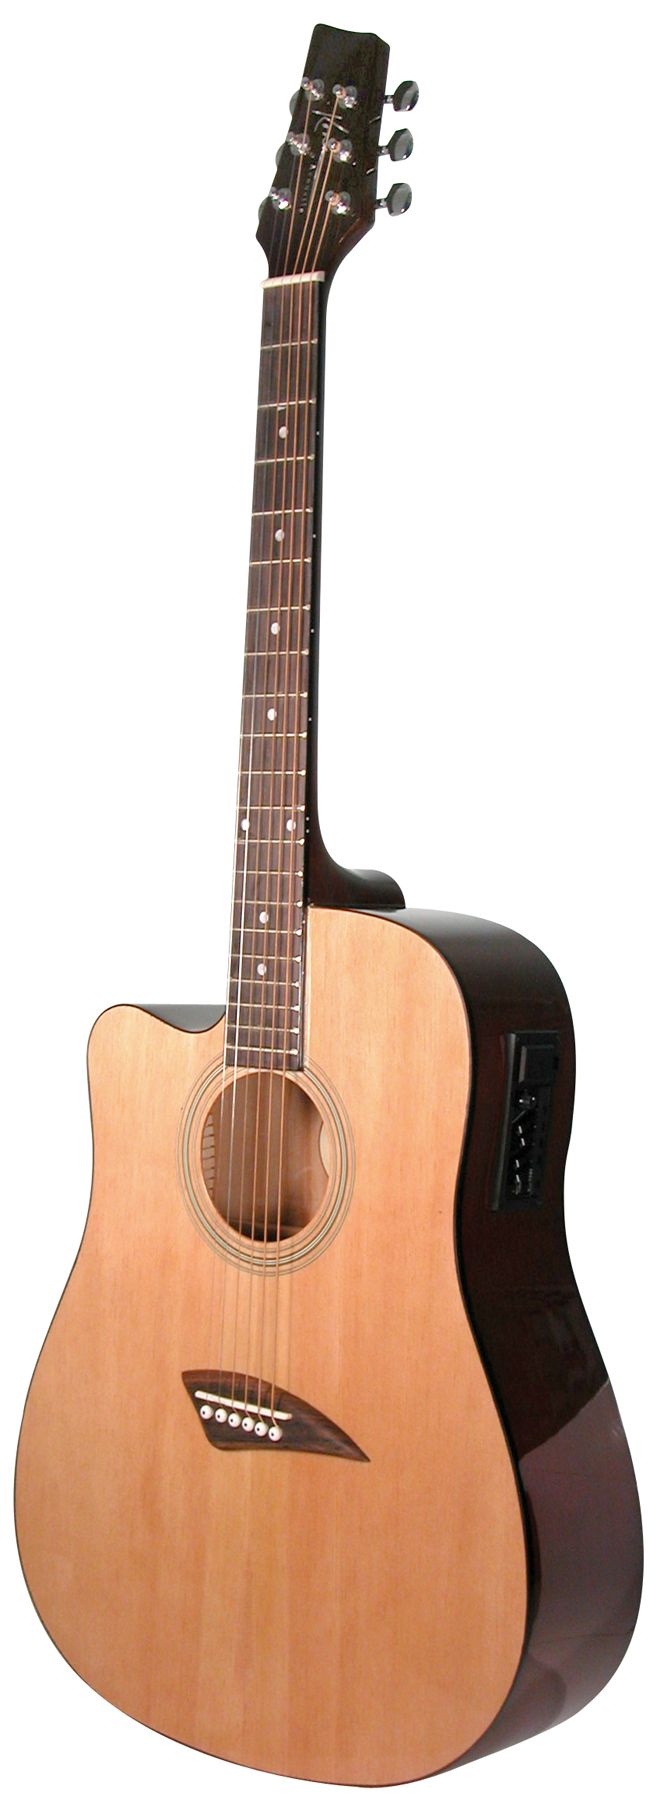 Kona Left-Handed Dreadnought Acoustic-Electric Spruce Top Guitar with High-Gloss Finish